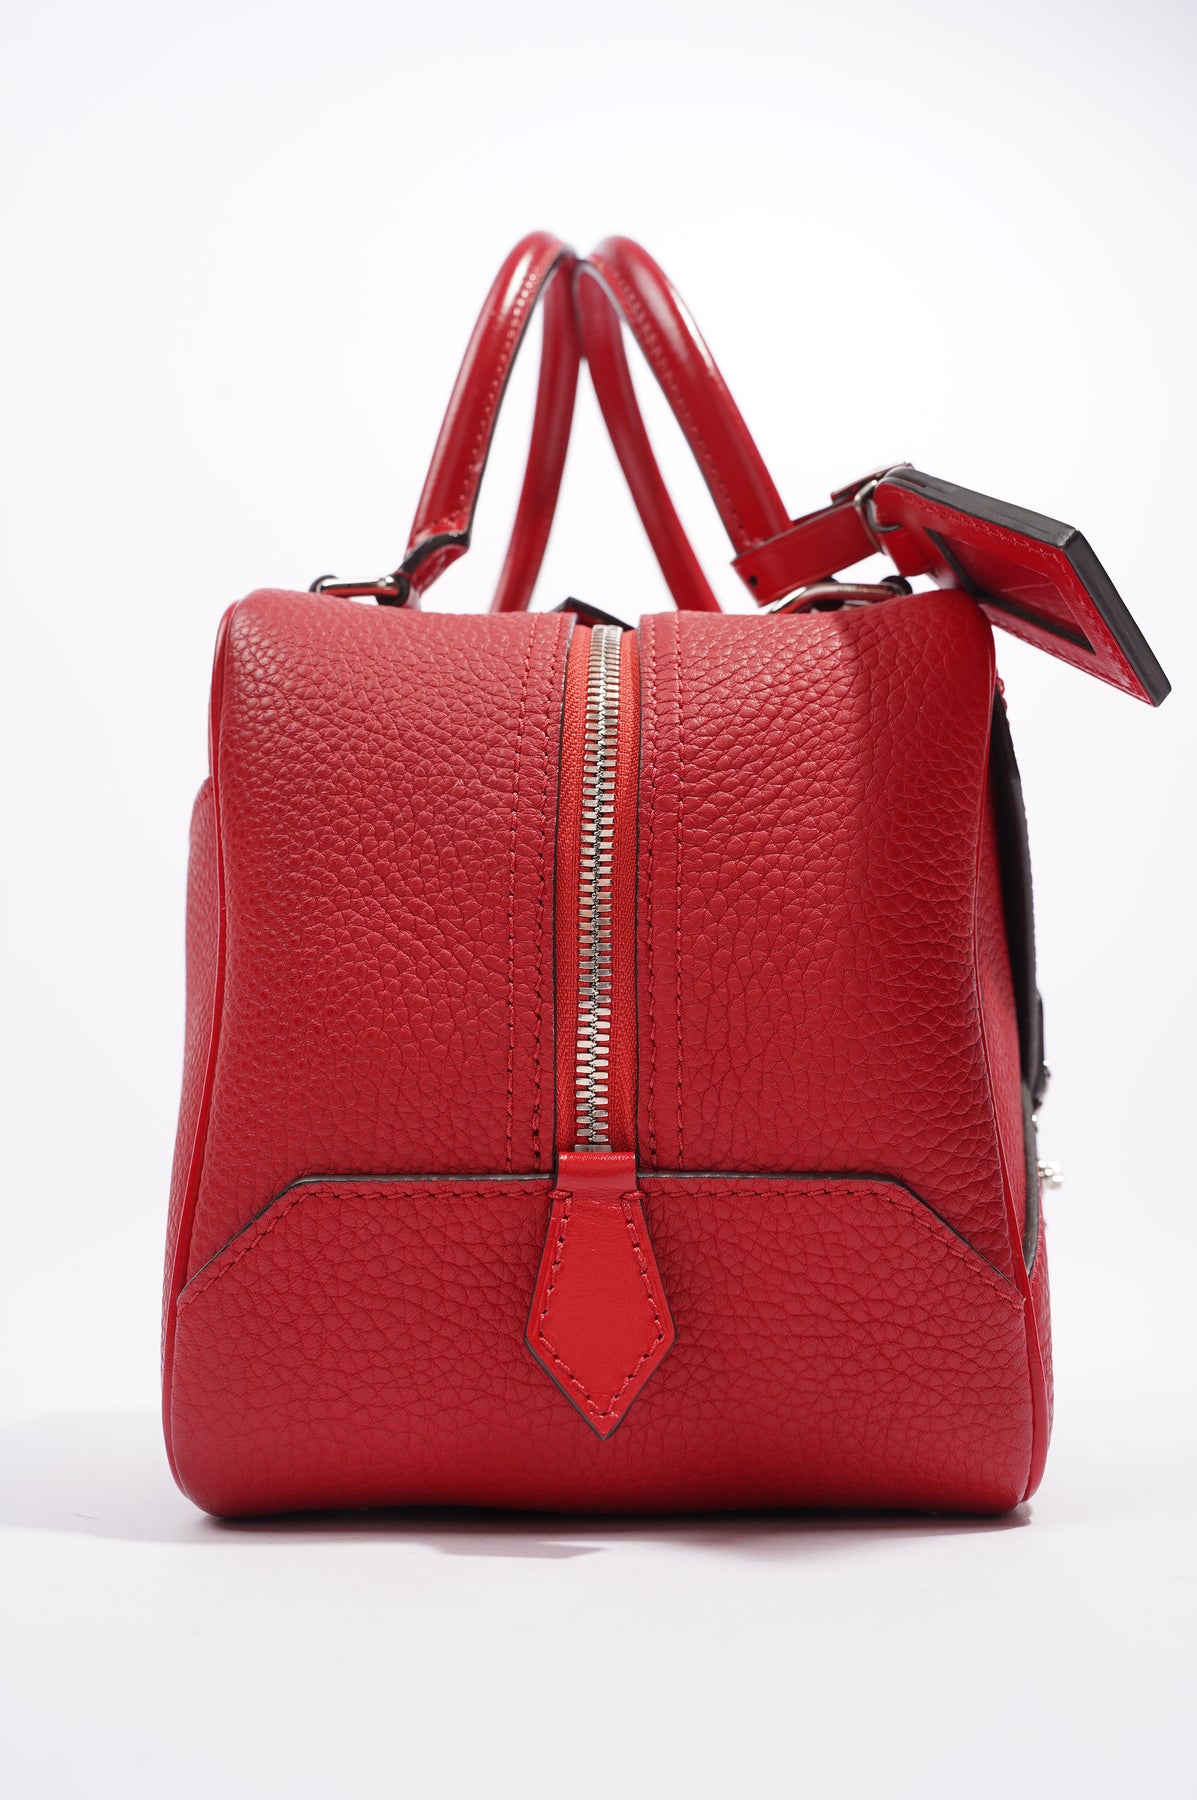 Louis Vuitton Neo Square Red Leather – Luxe Collective